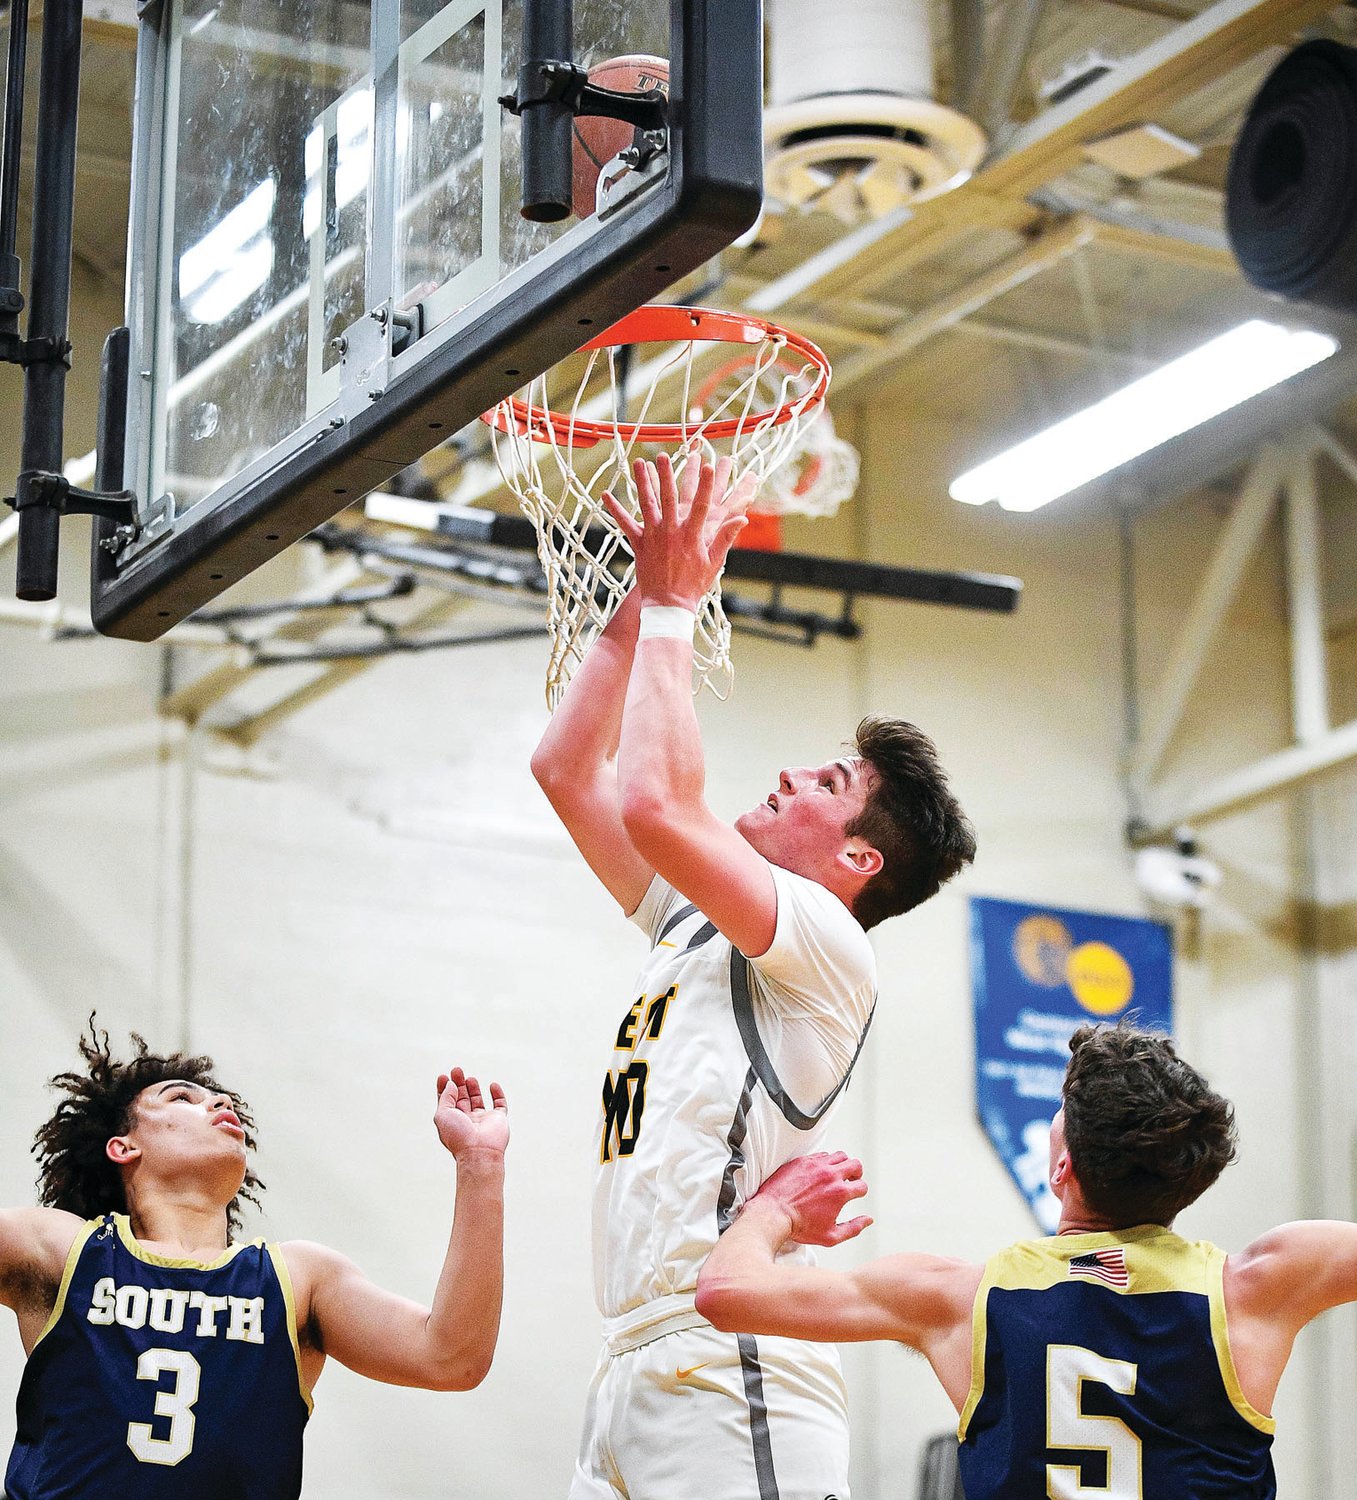 CB West’s John Lee gets up high for an easy layup against CR South’s Anthony Burns and Matt Robinson.